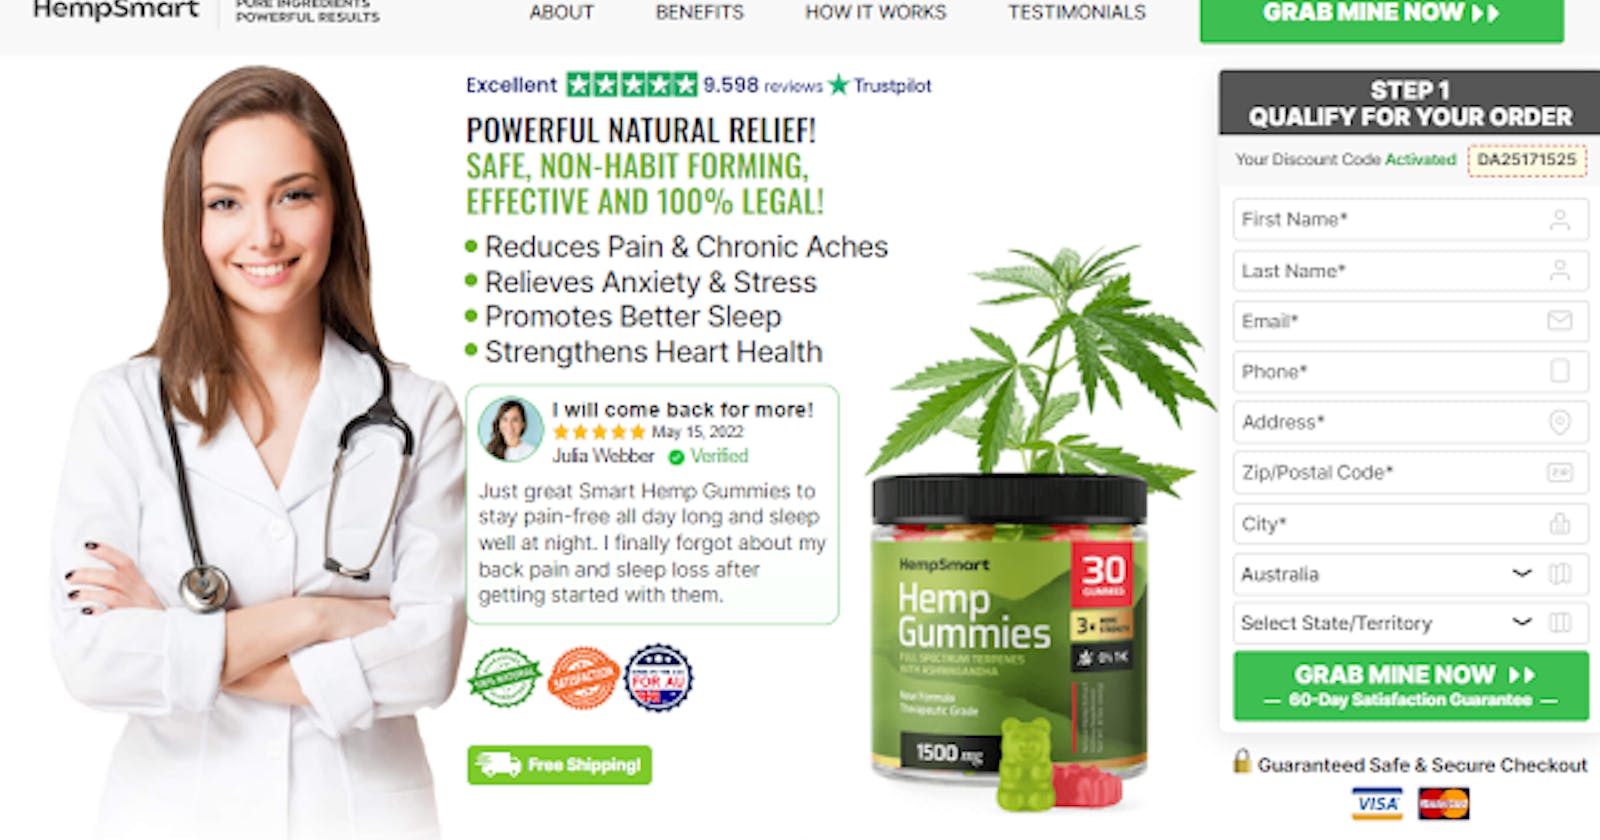 Smart Hemp Gummies South Africa Reviews: 100% Natural, Relief Anxiety & Stress, Joint Pain, Pure, Benefits, Ingredients, Price & Where To Buy?